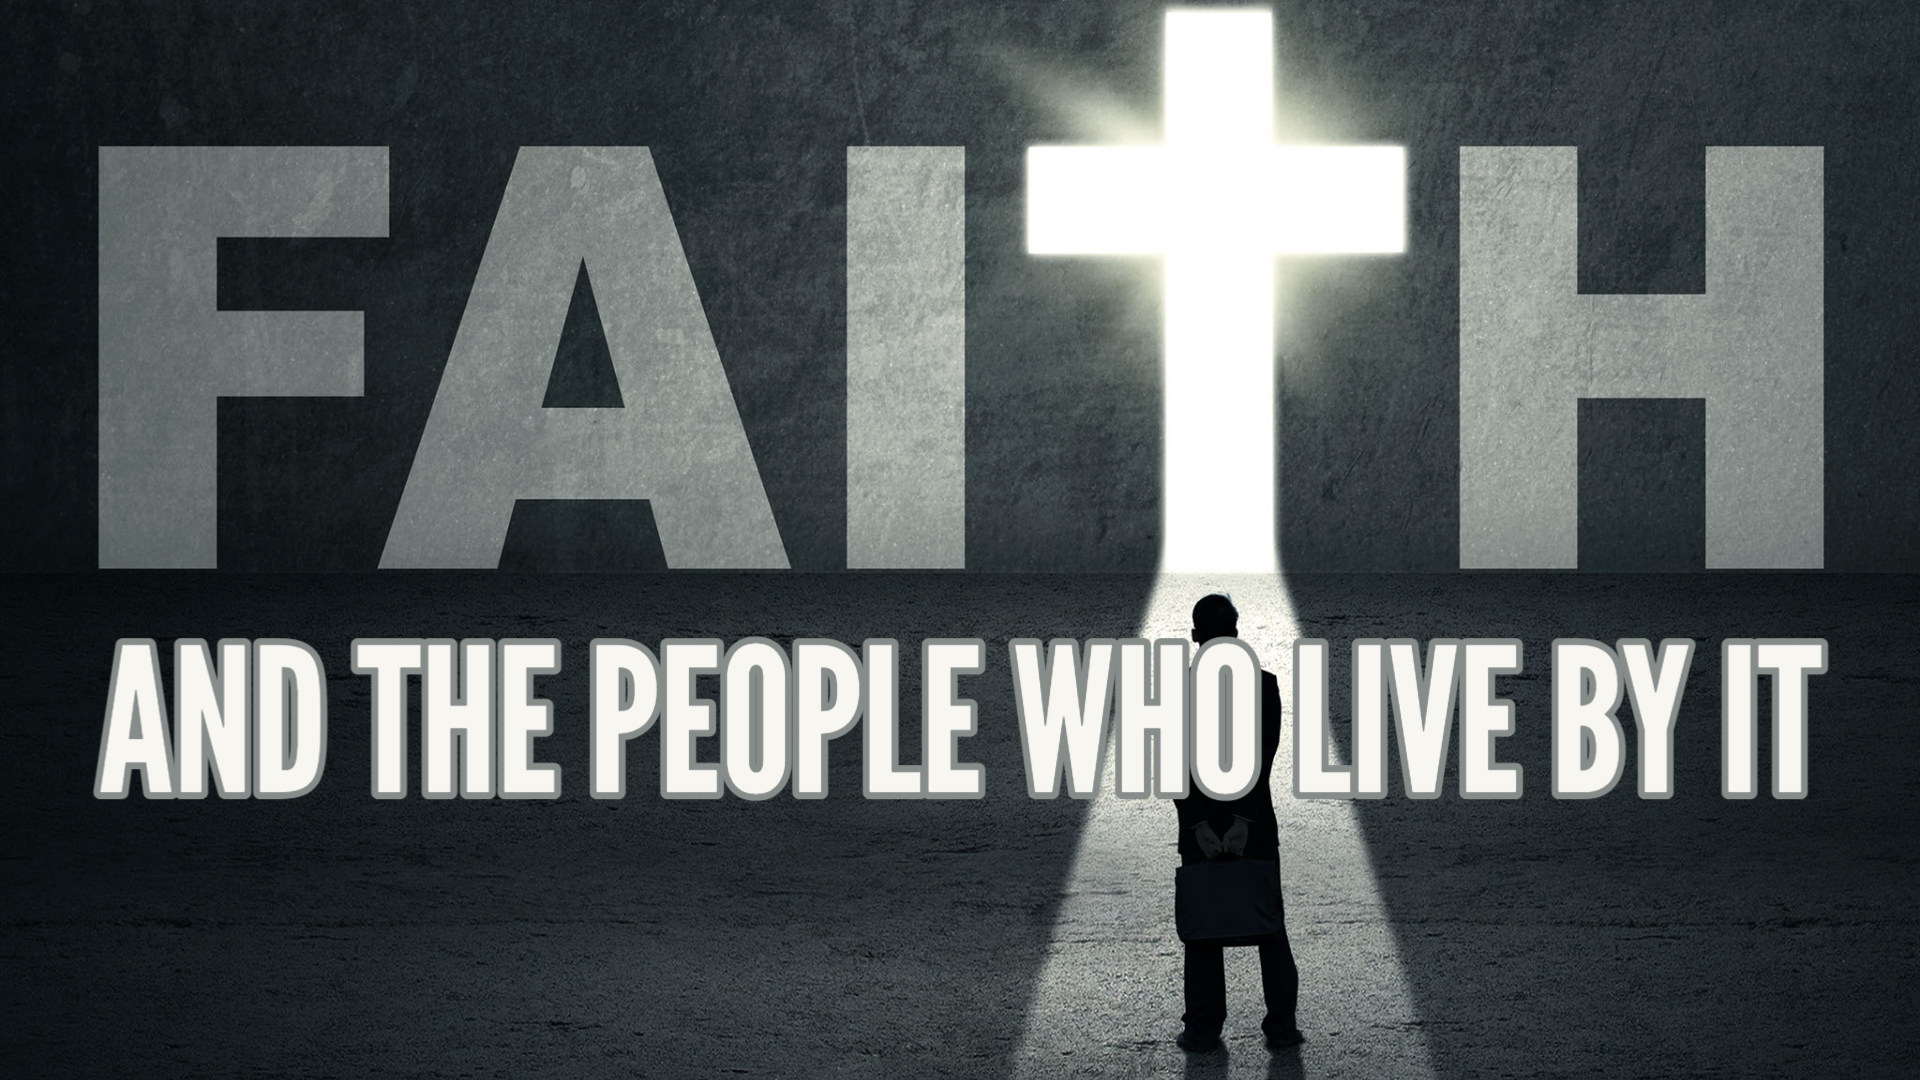 We Are People Who Live By Faith